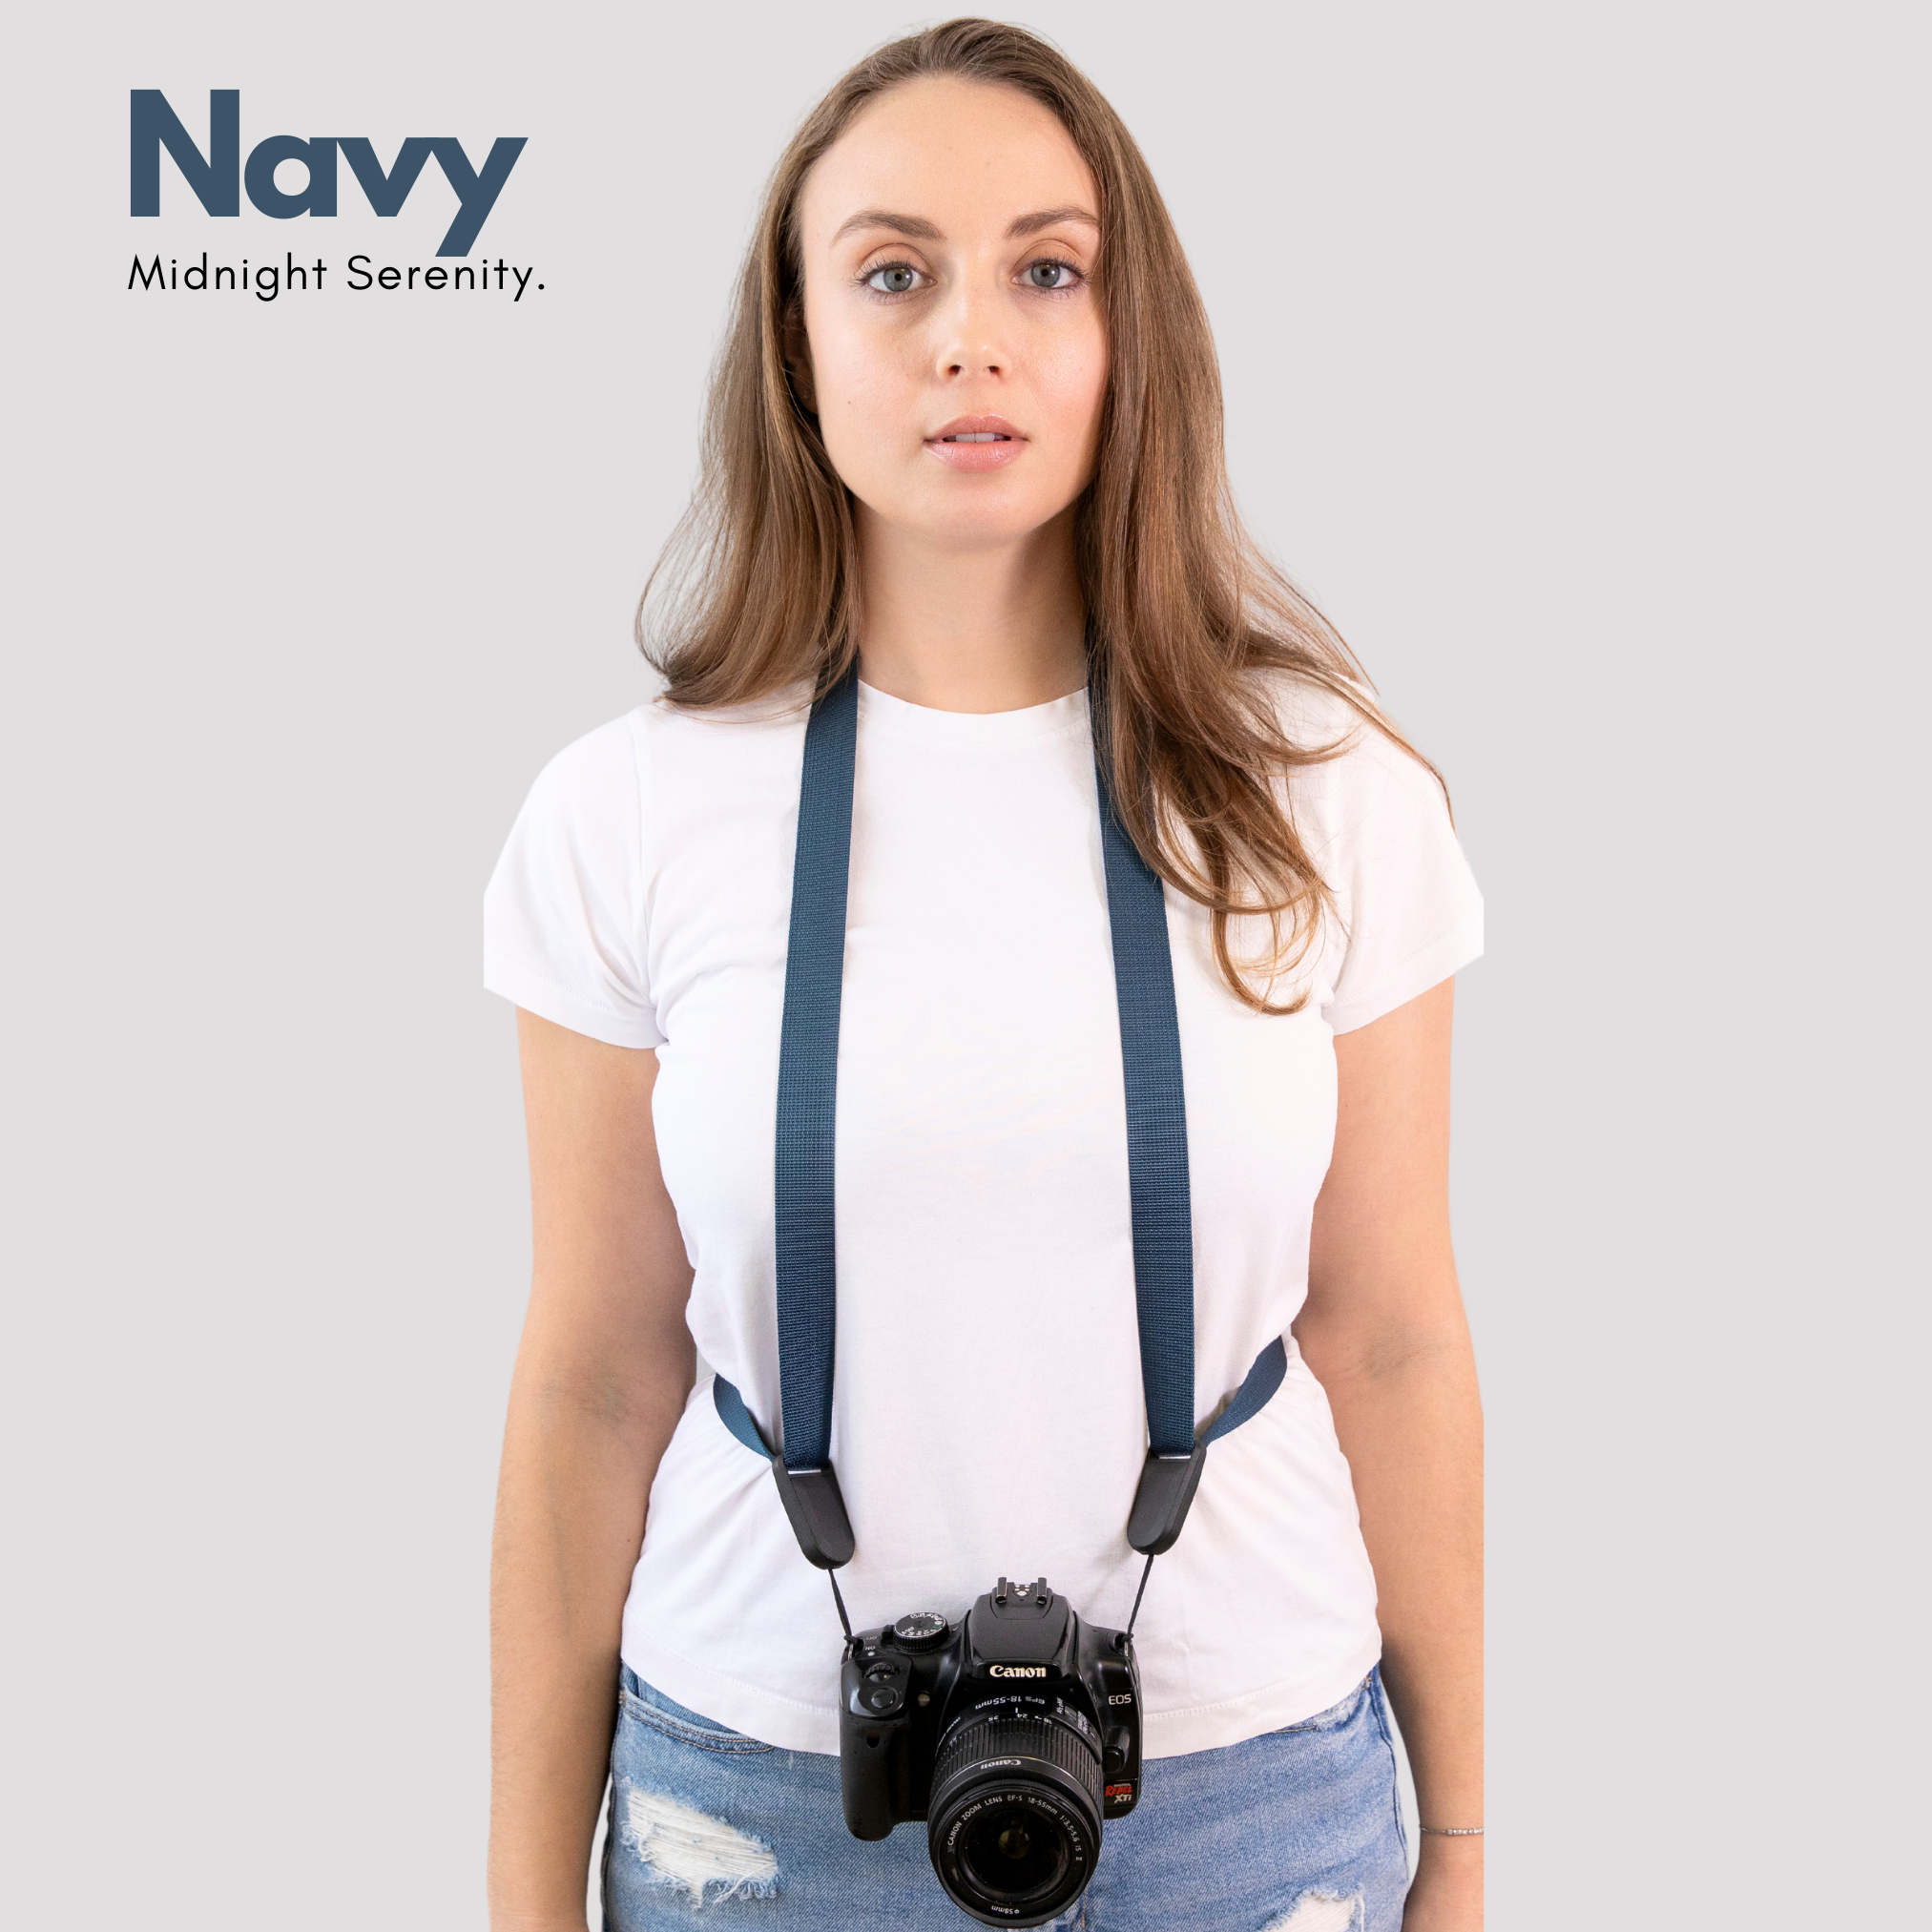 Camstrap - Hands-free strap for cameras and binoculars